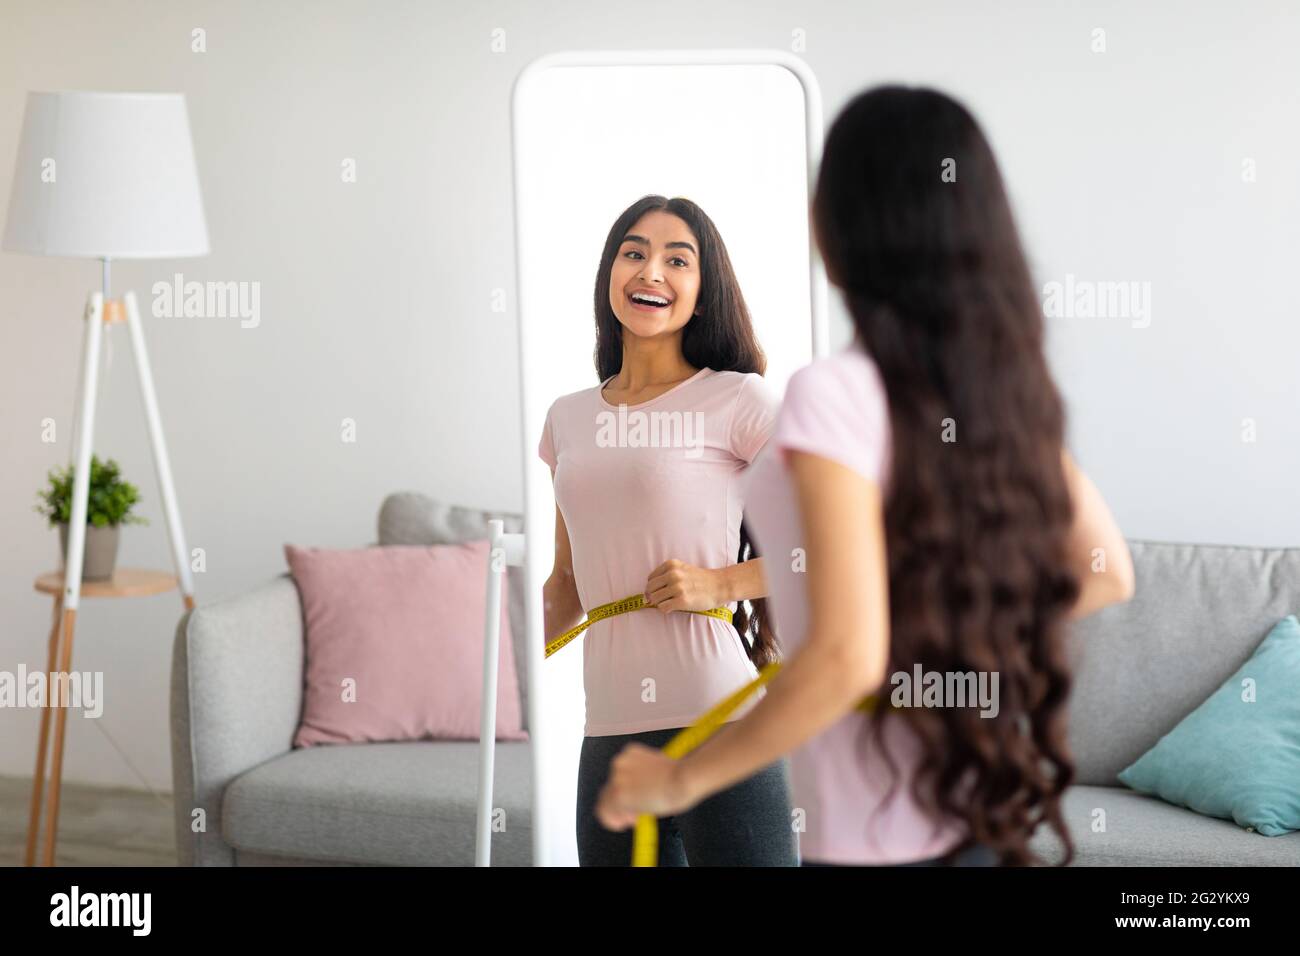 Attractive young Indian woman measuring her waist with tape near mirror indoors, copy space Stock Photo